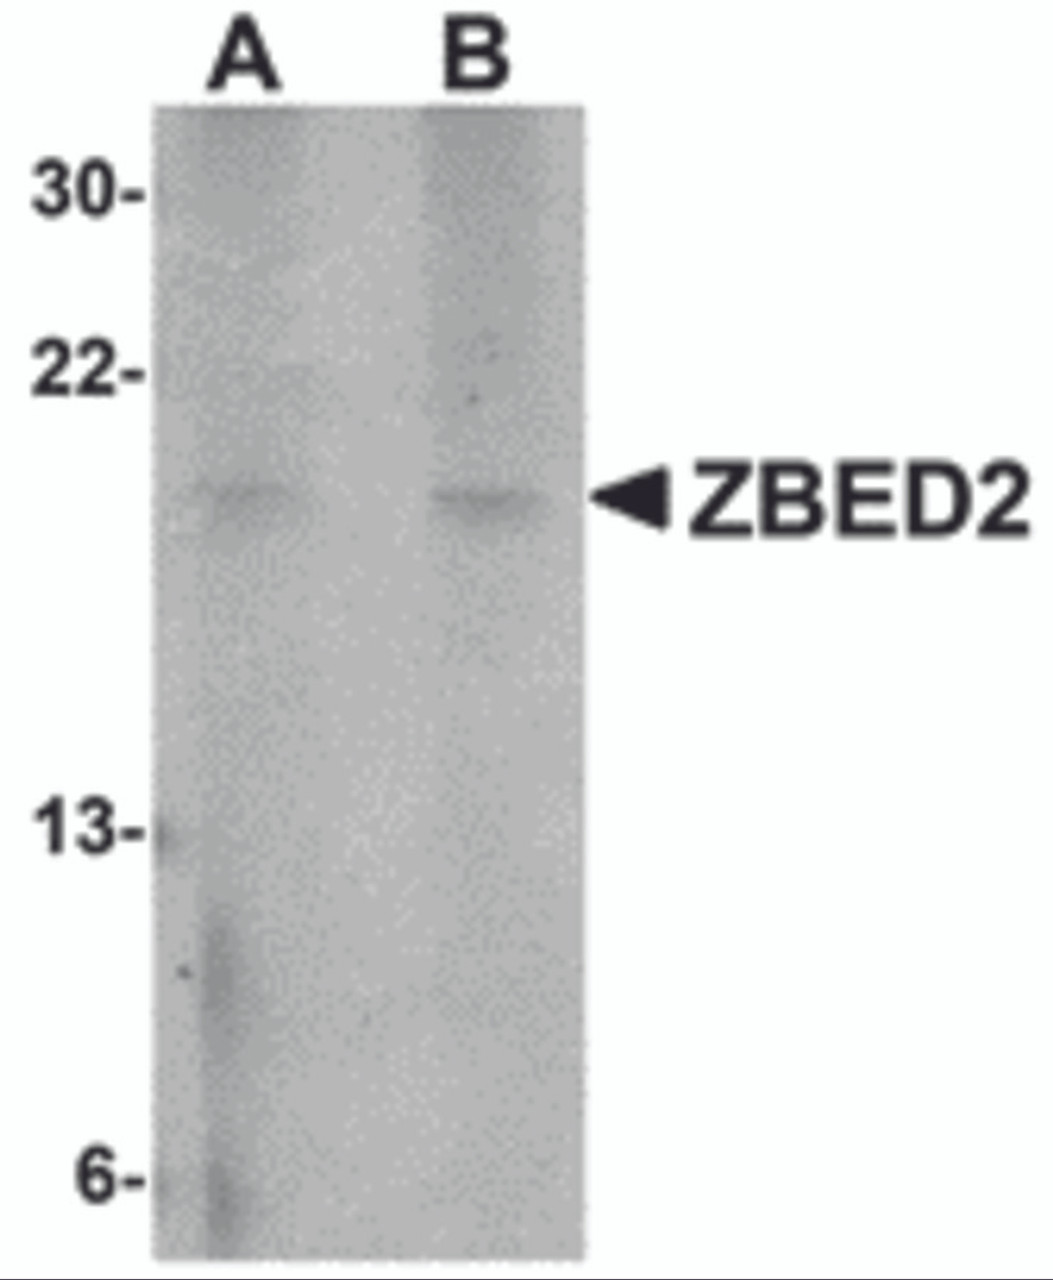 Western blot analysis of ZBED2 in A549 cell lysate with ZBED2 antibody at (A) 1 and (B) 2 &#956;g/mL.